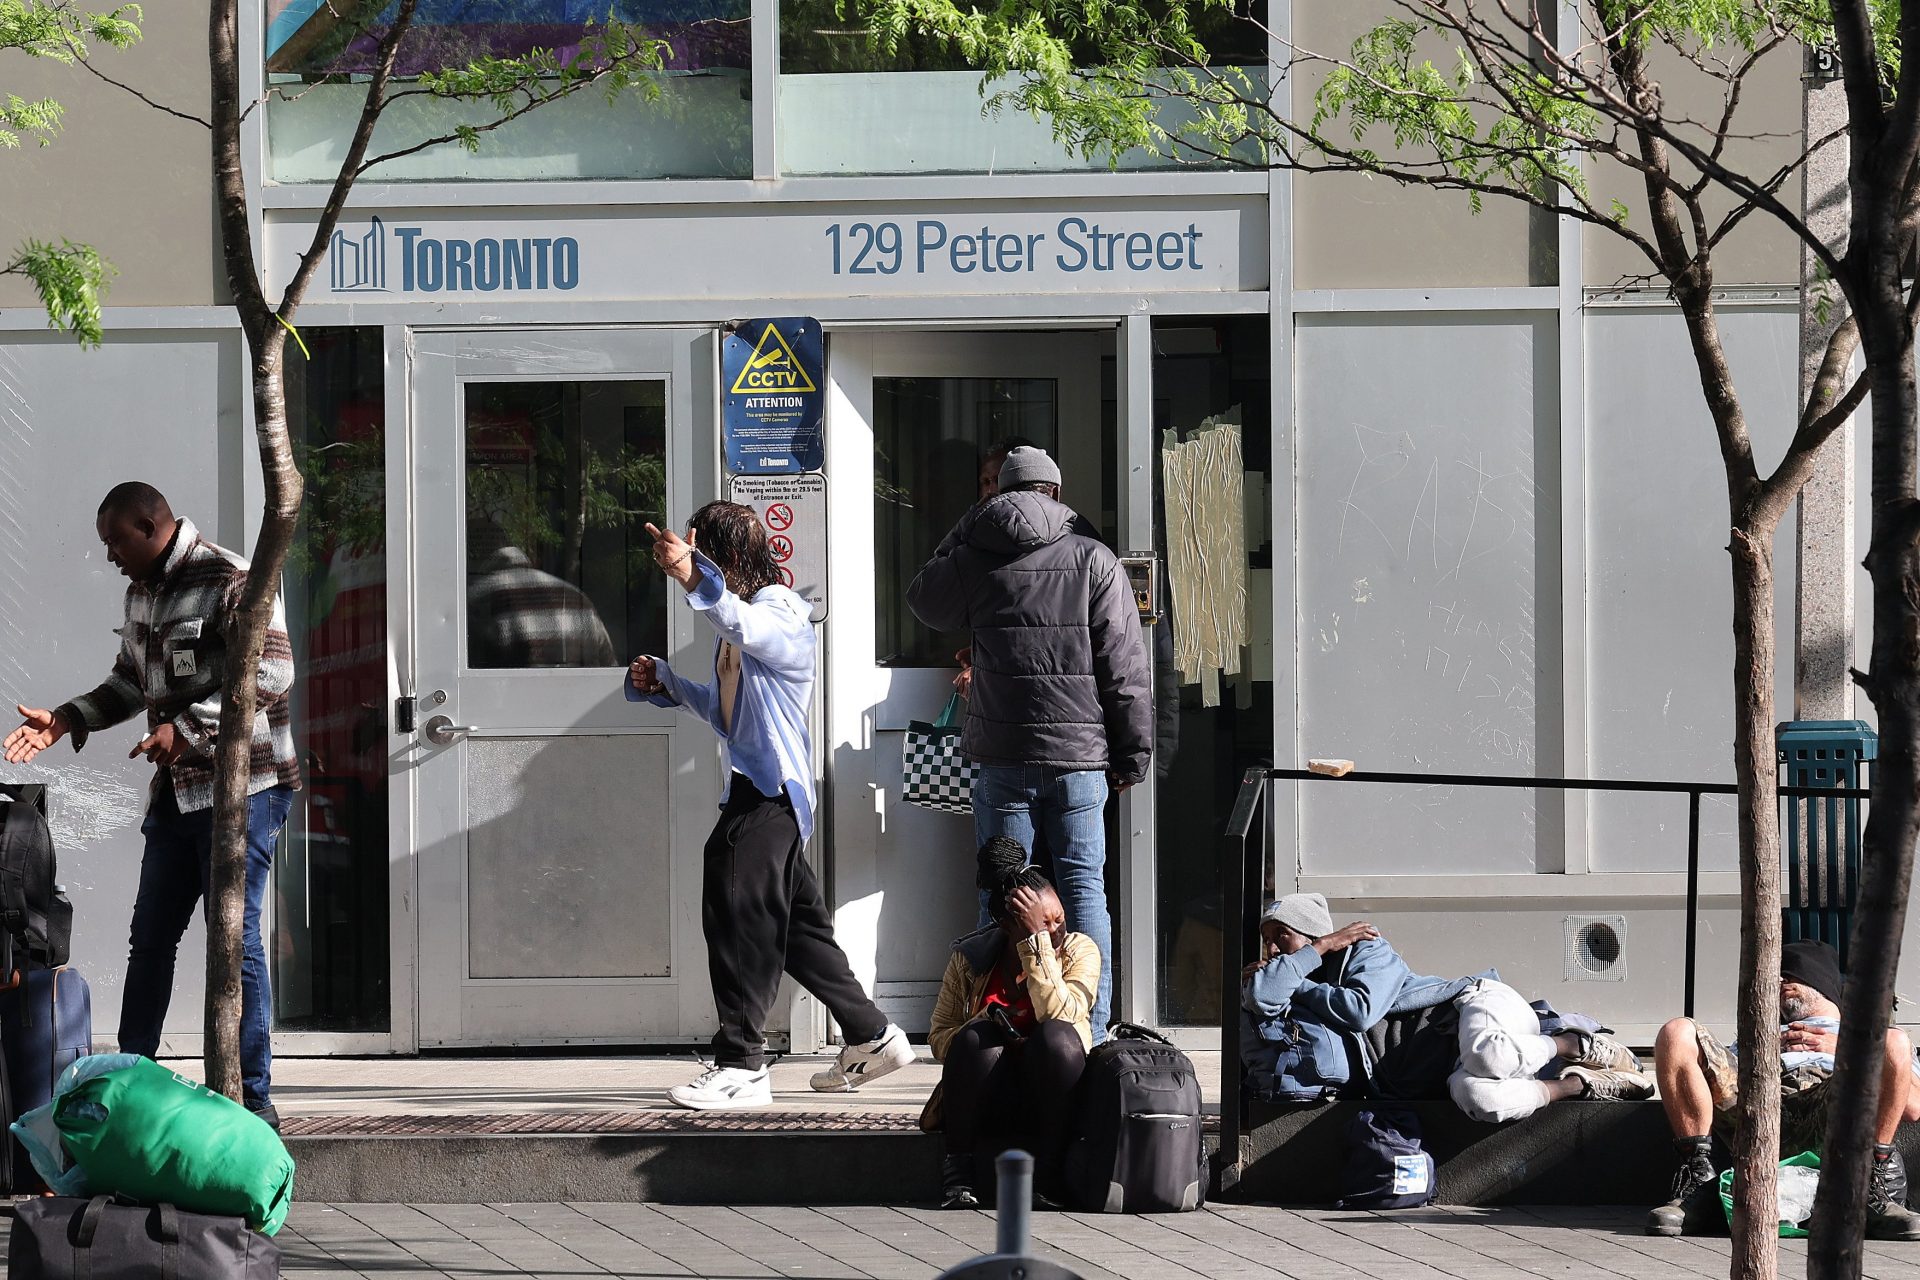 Canadian government has spent massive amounts but homelessness is still on the rise